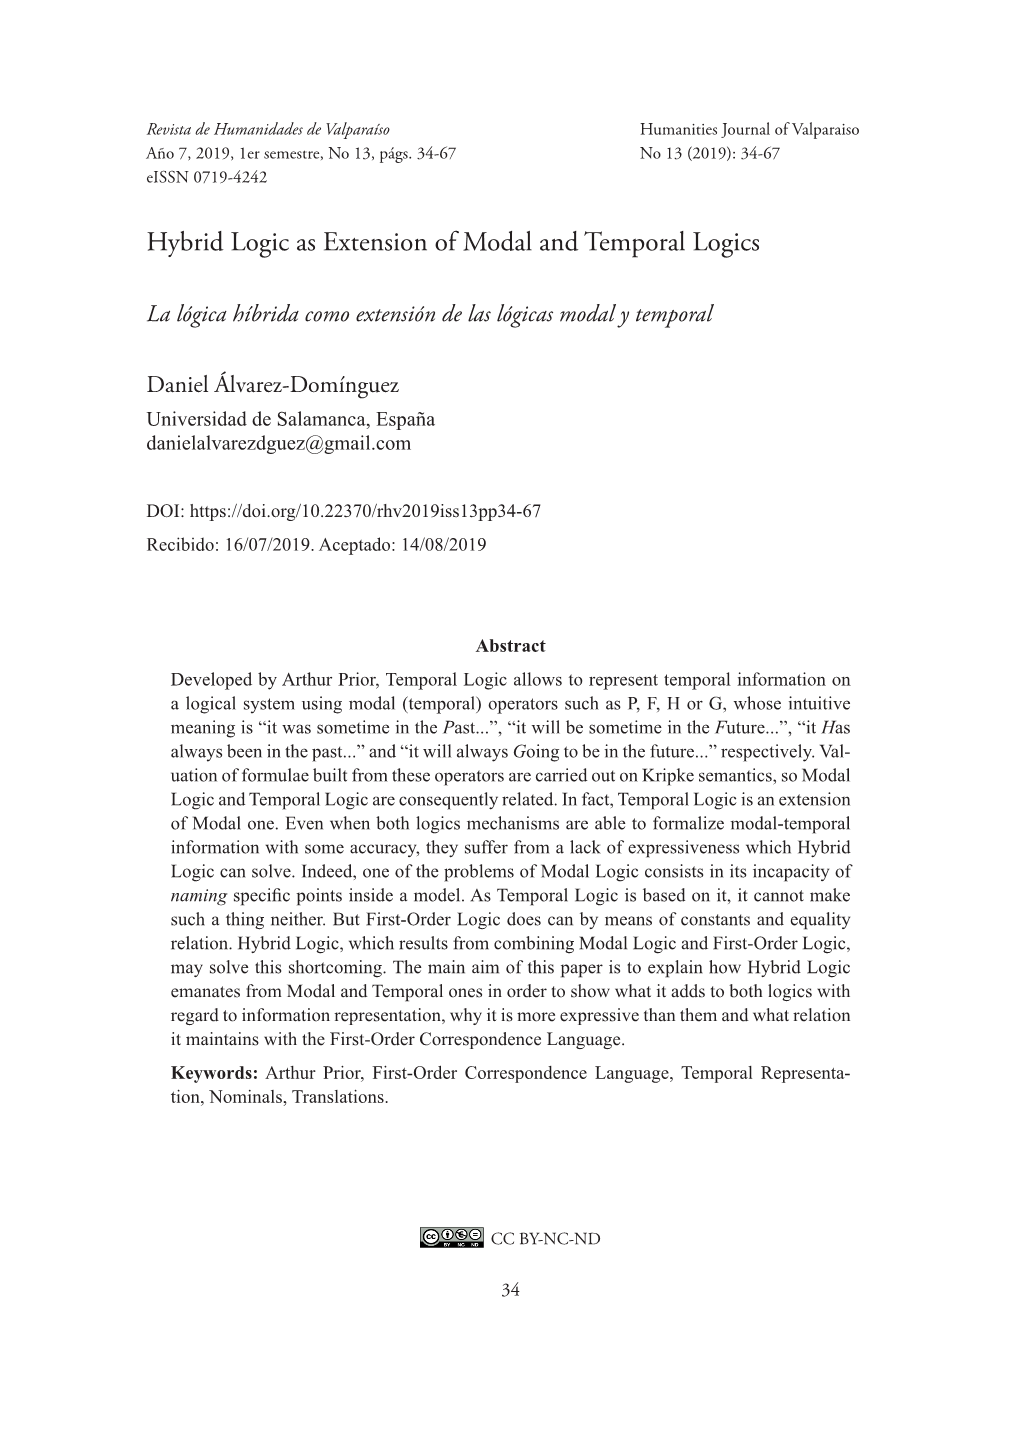 Hybrid Logic As Extension of Modal and Temporal Logics